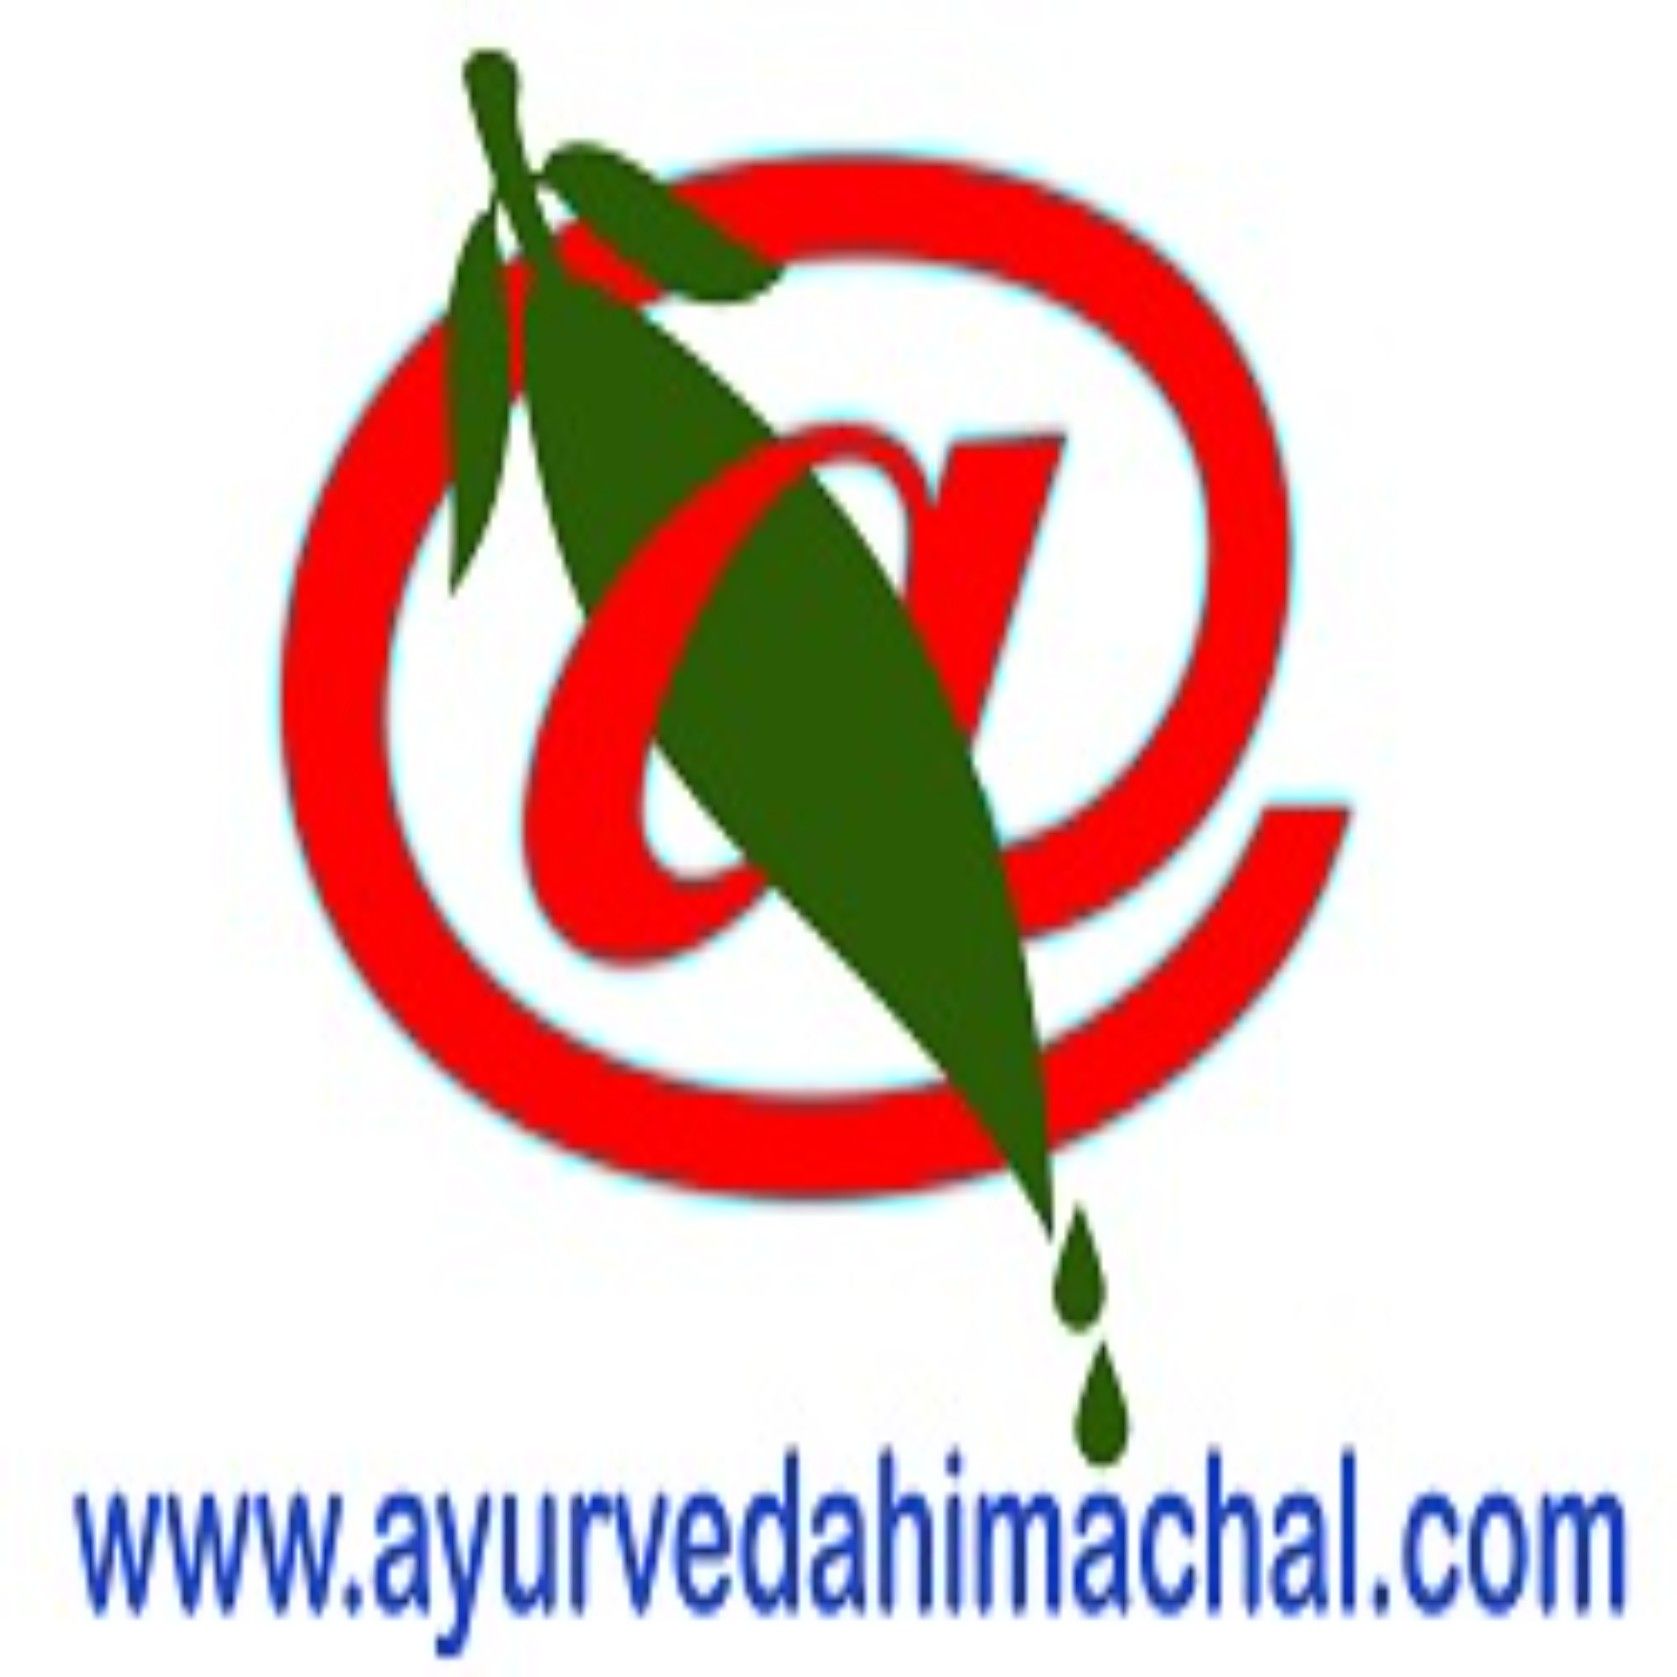 Aarogyam Ayurveda Clinic in Mulund East, Mumbai - Book Appointment, View  Contact Number, Feedbacks, Address | Dr. Jayesh Jadhav